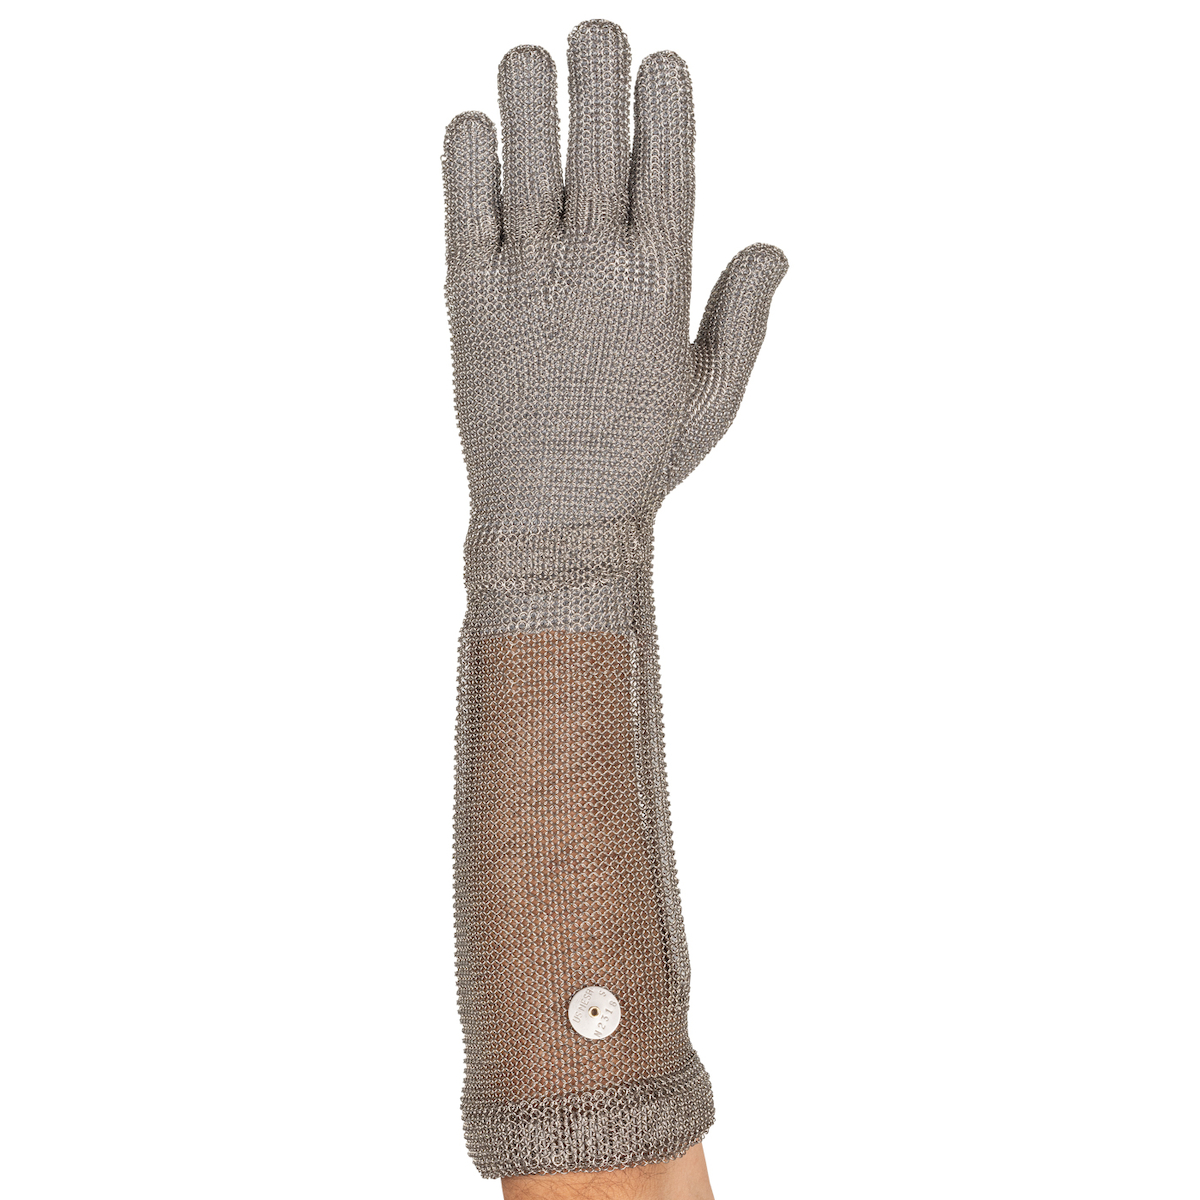 USM-1547 US Mesh® Stainless Steel Mesh Glove with Spring Closure - Forearm Length